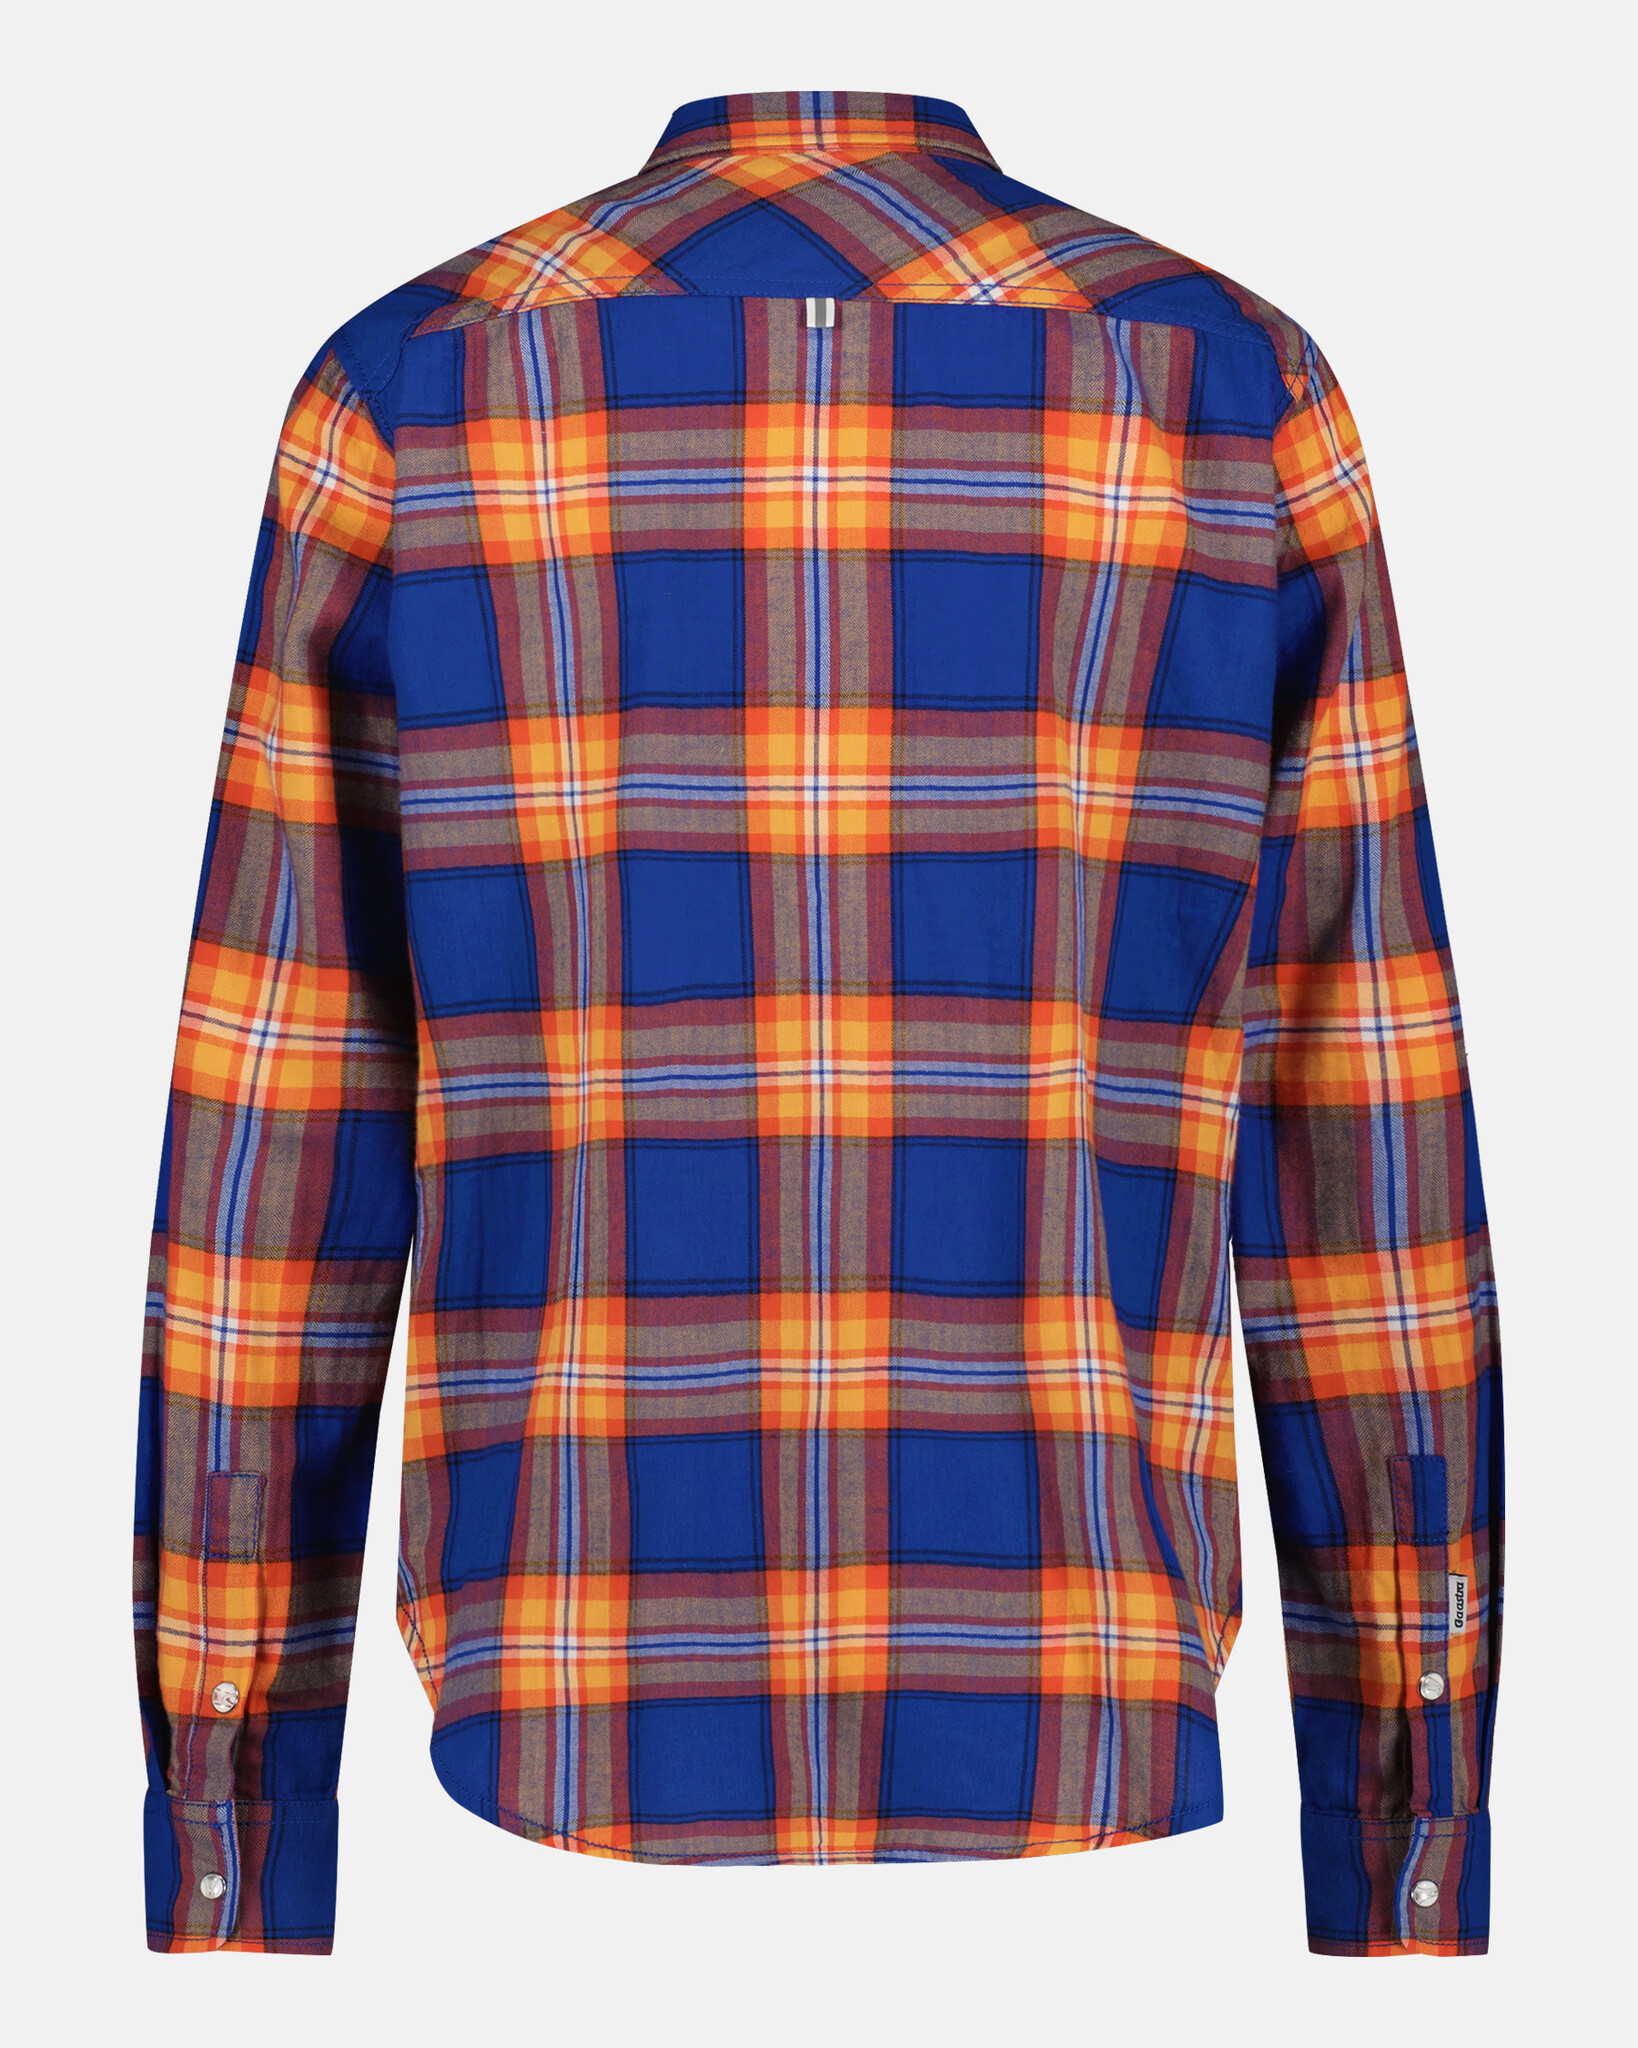 Womens Regular fit 100% cotton herringbone, yarn dyed check shirt with two chest pockets and bias cut yoke